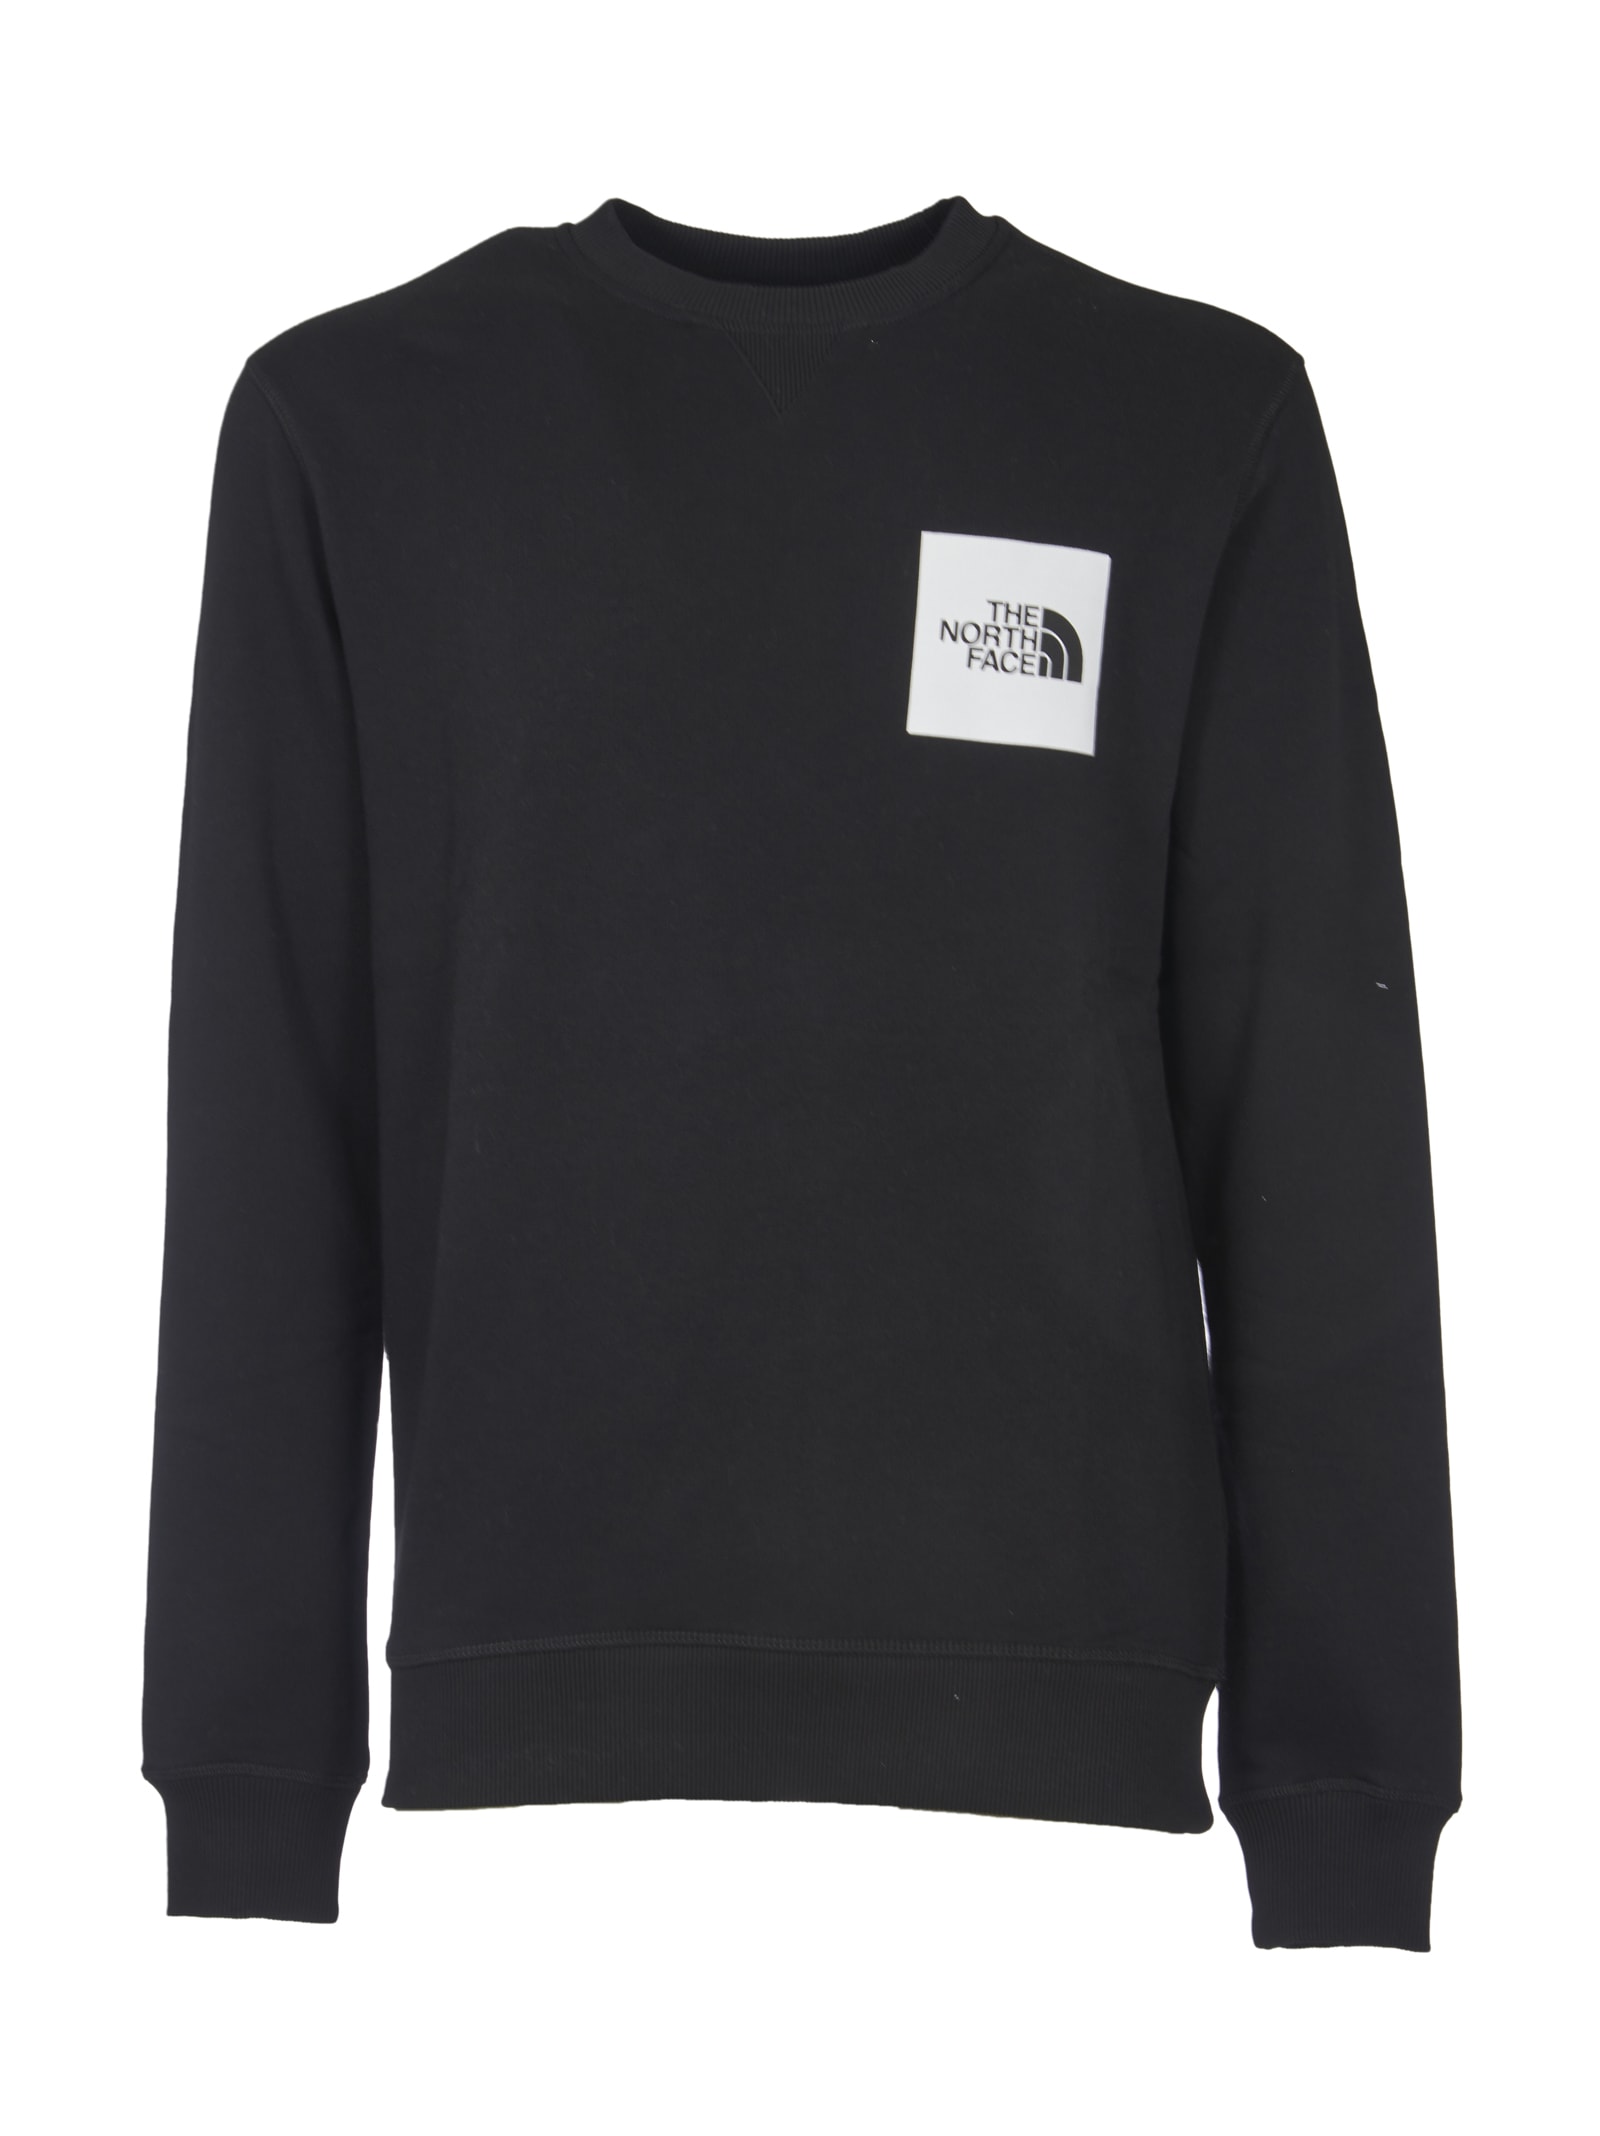 THE NORTH FACE LOGO PATCHED RIBBED SWEATSHIRT